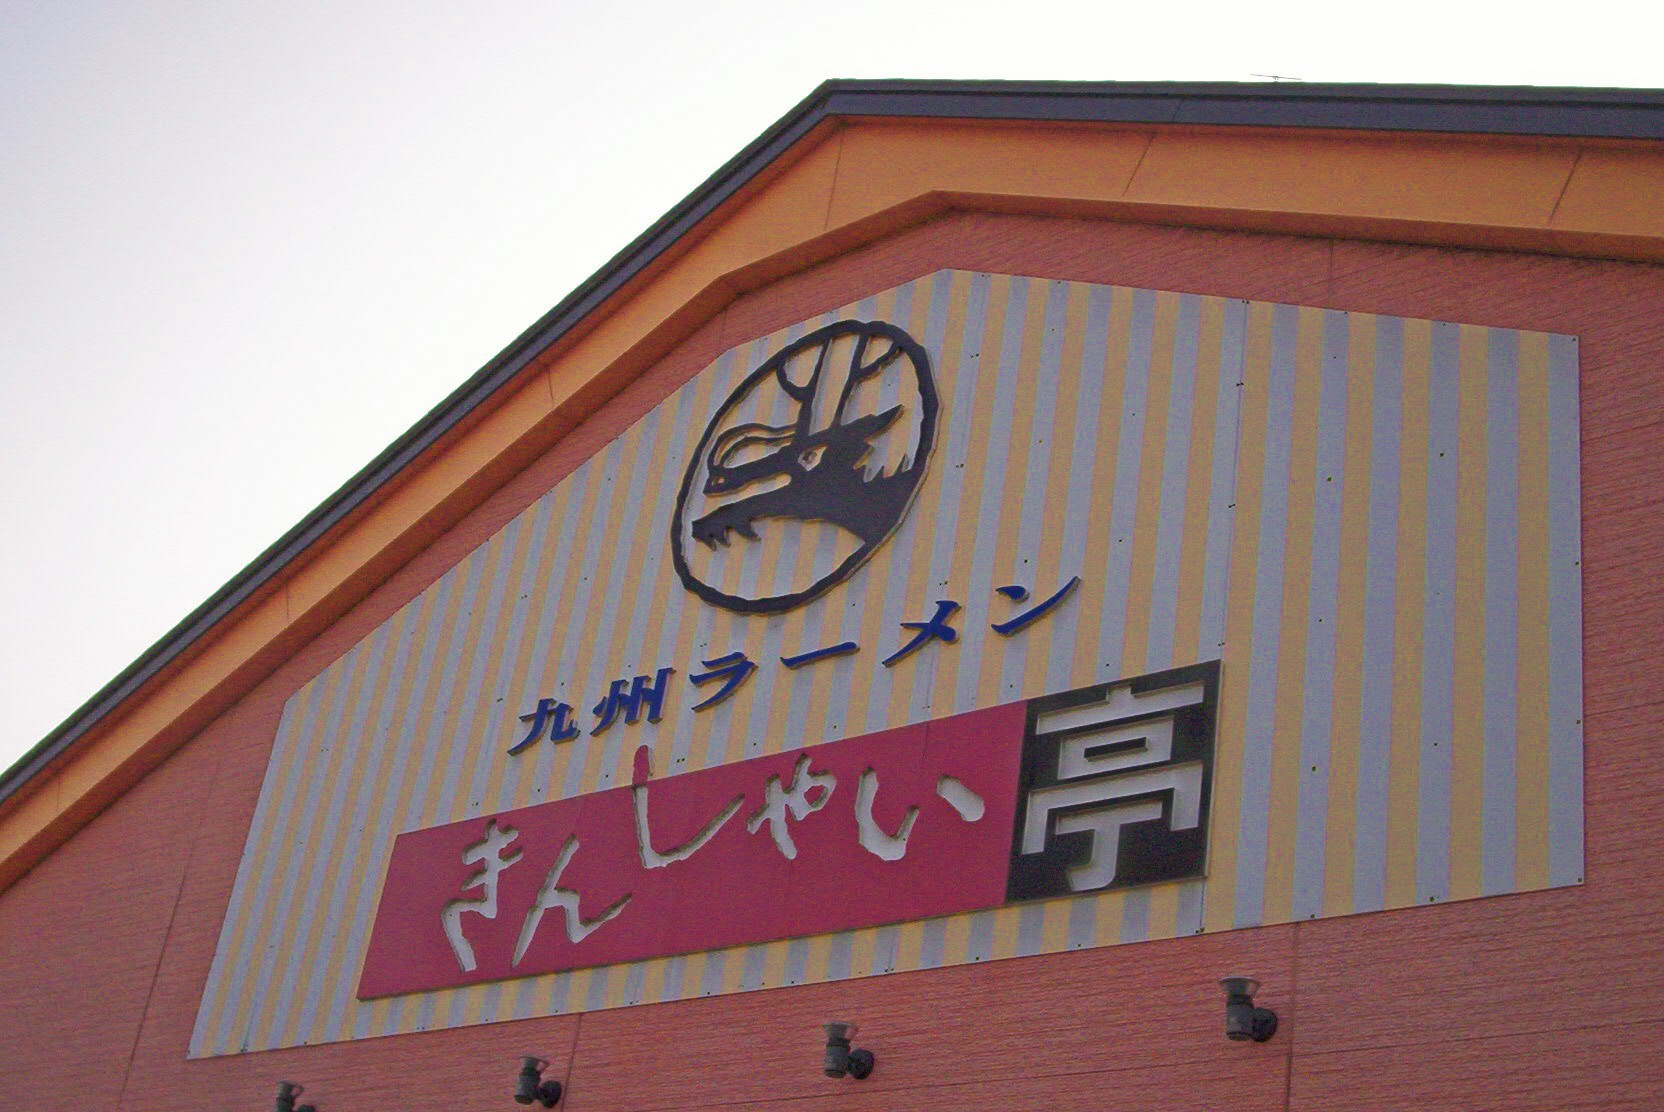 This is Kinshaitei, the second-closest ramen (Chinese noodle) restaurant to my apartment. Is that a picture of a Kirin I see? There seems to be a connection between this particular style of noodes (Kyushu ramen) and that image. . . .